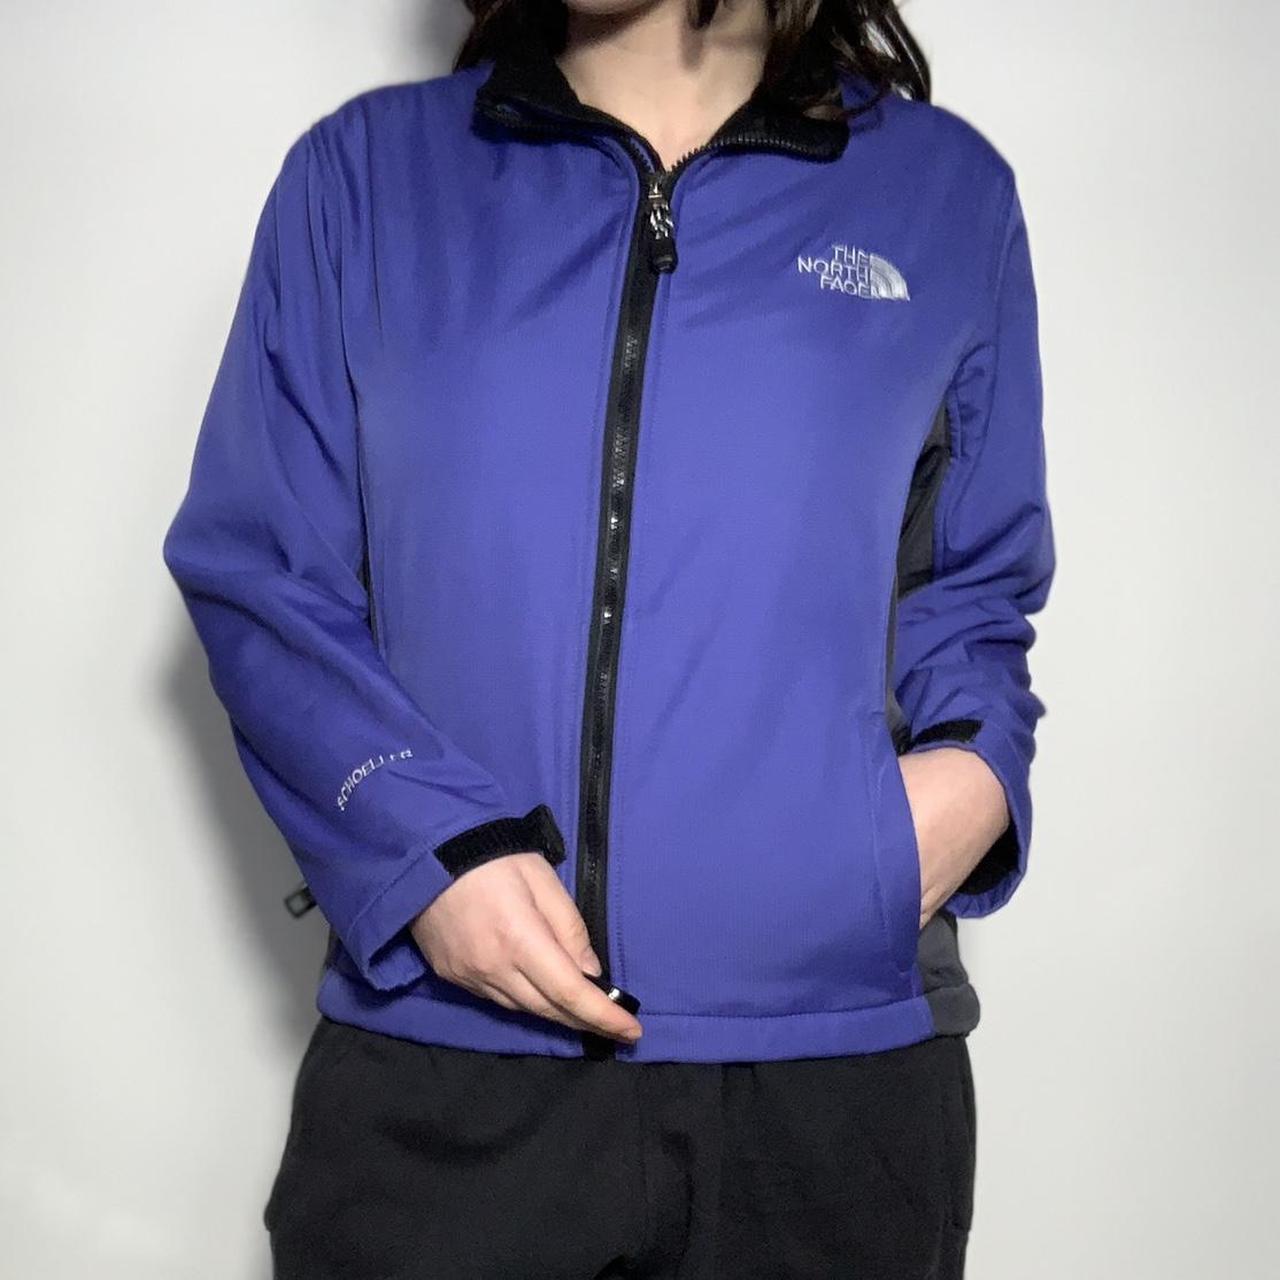 Vintage 90s The North Face Summit Series fleece-lined jacket